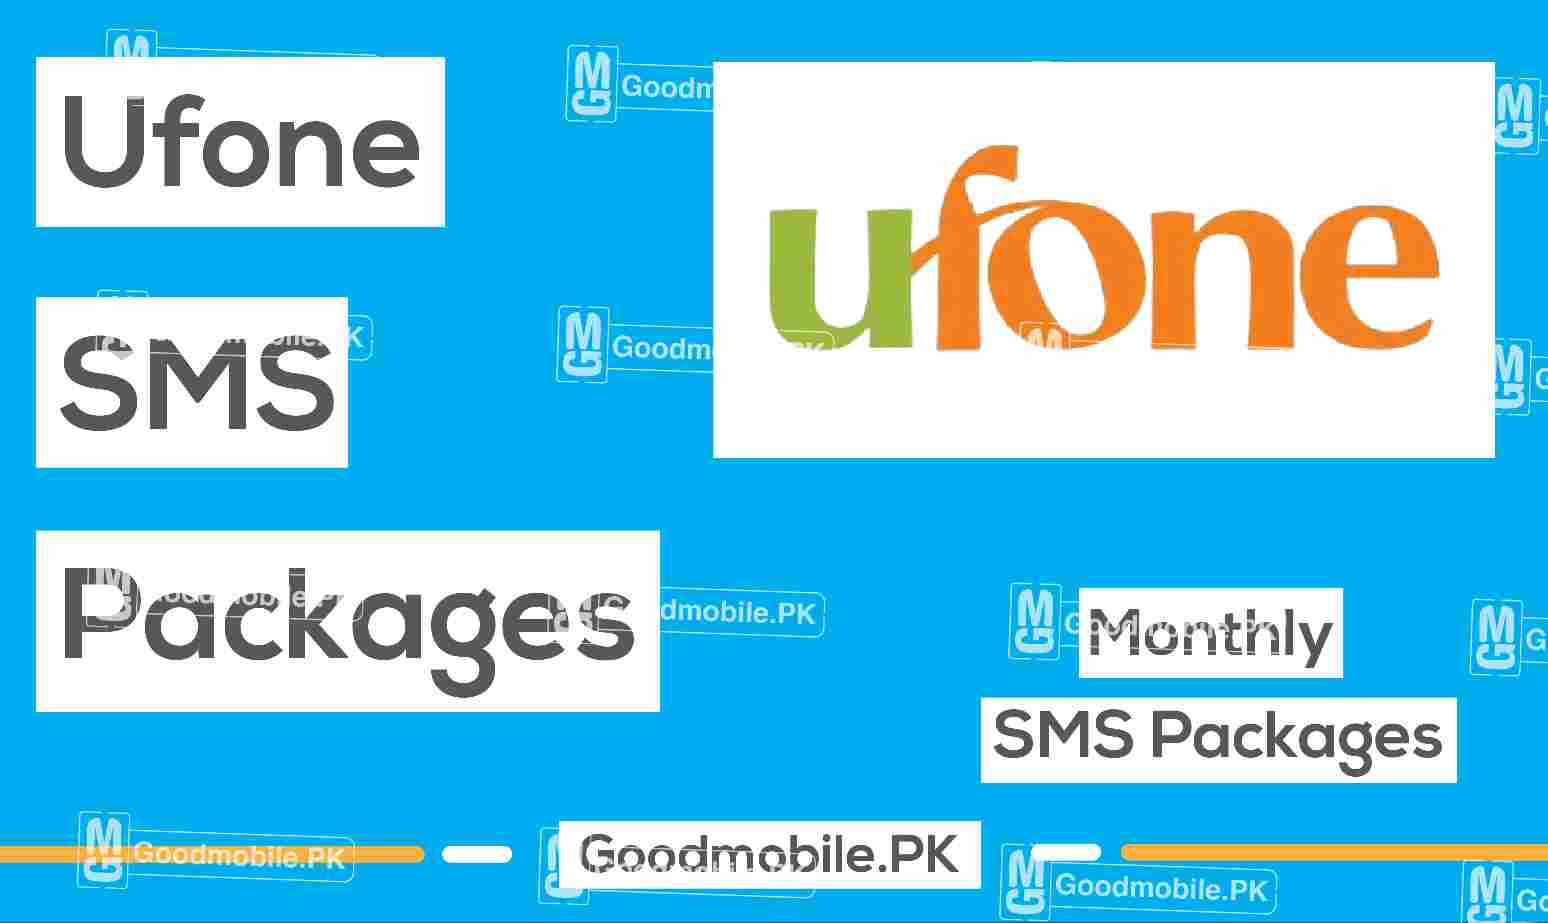 Ufone SMS Packages - Daily, Weekly and Monthly 29 Goodmobile.PK